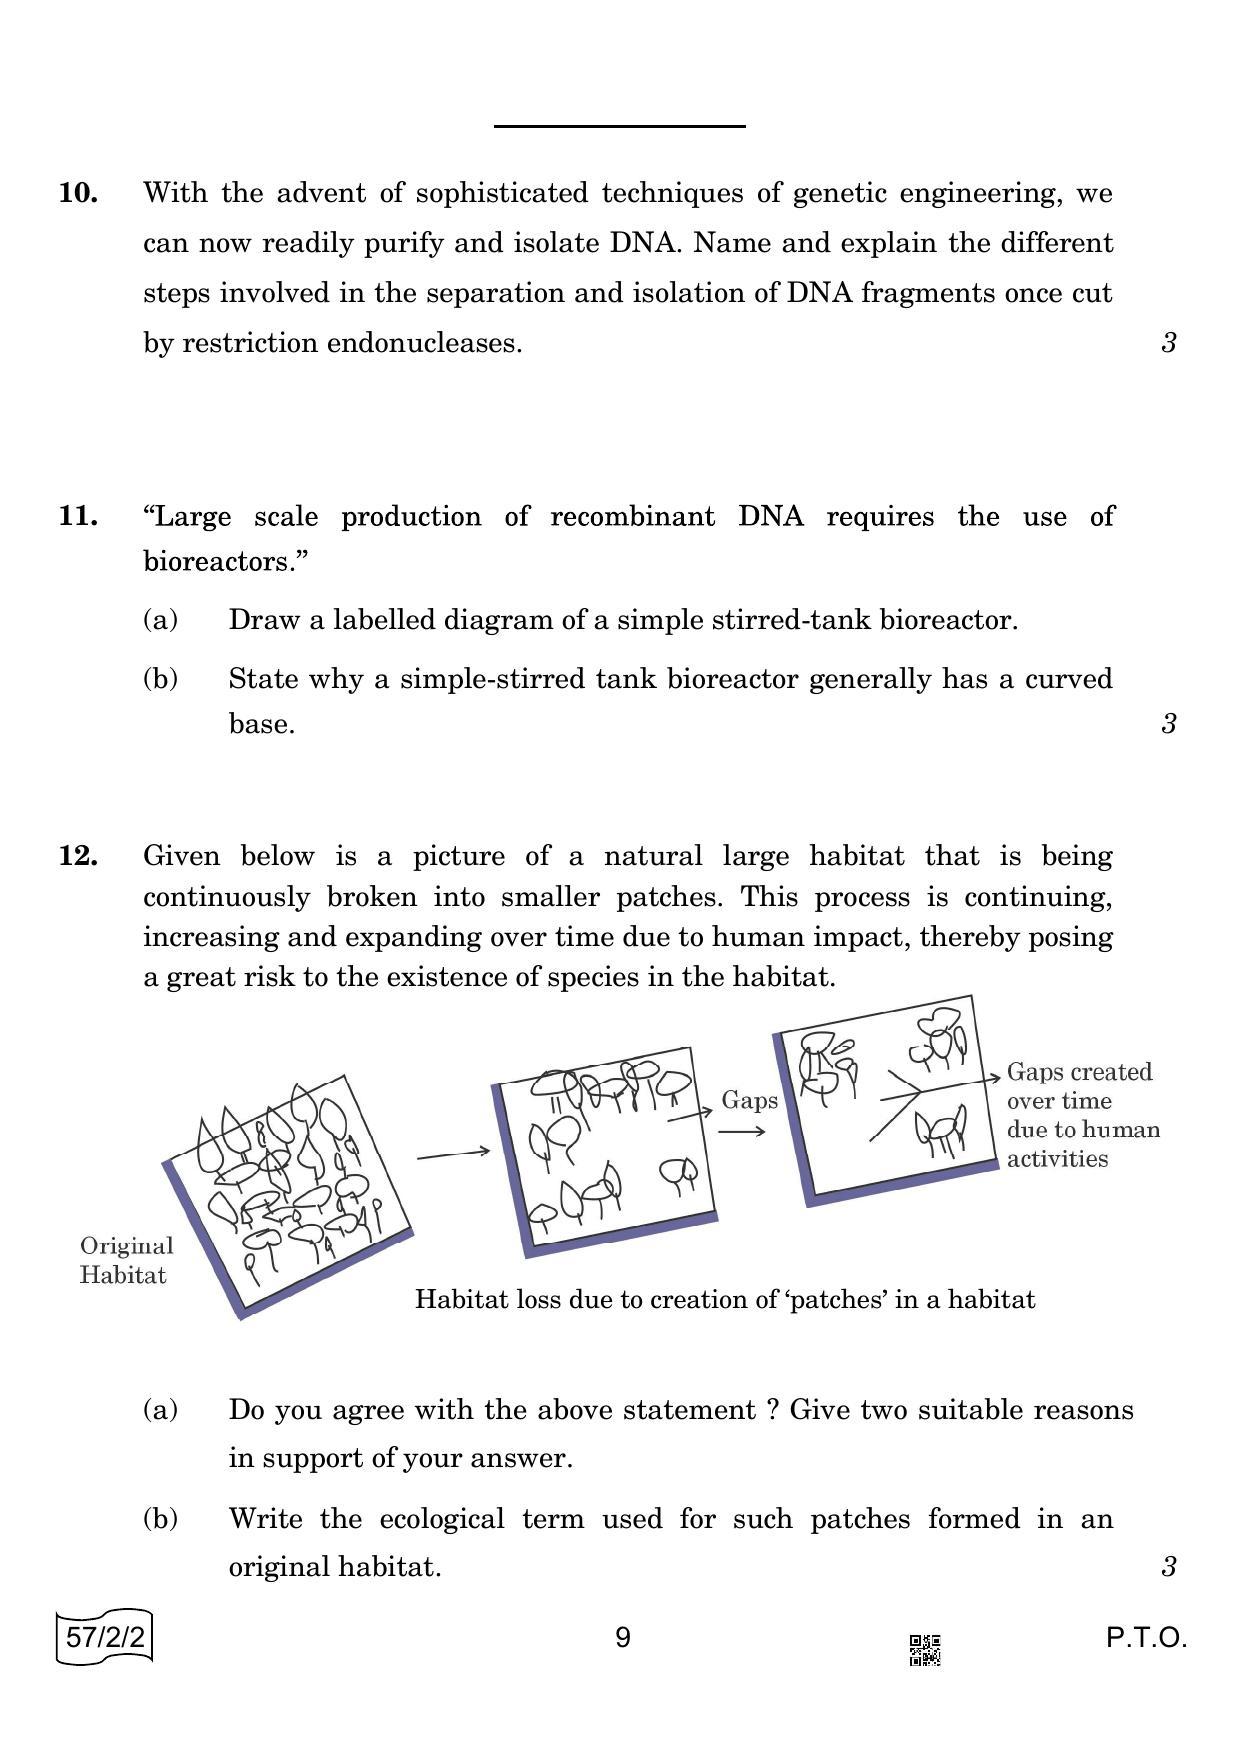 CBSE Class 12 57-2-2 Biology 2022 Question Paper - Page 9